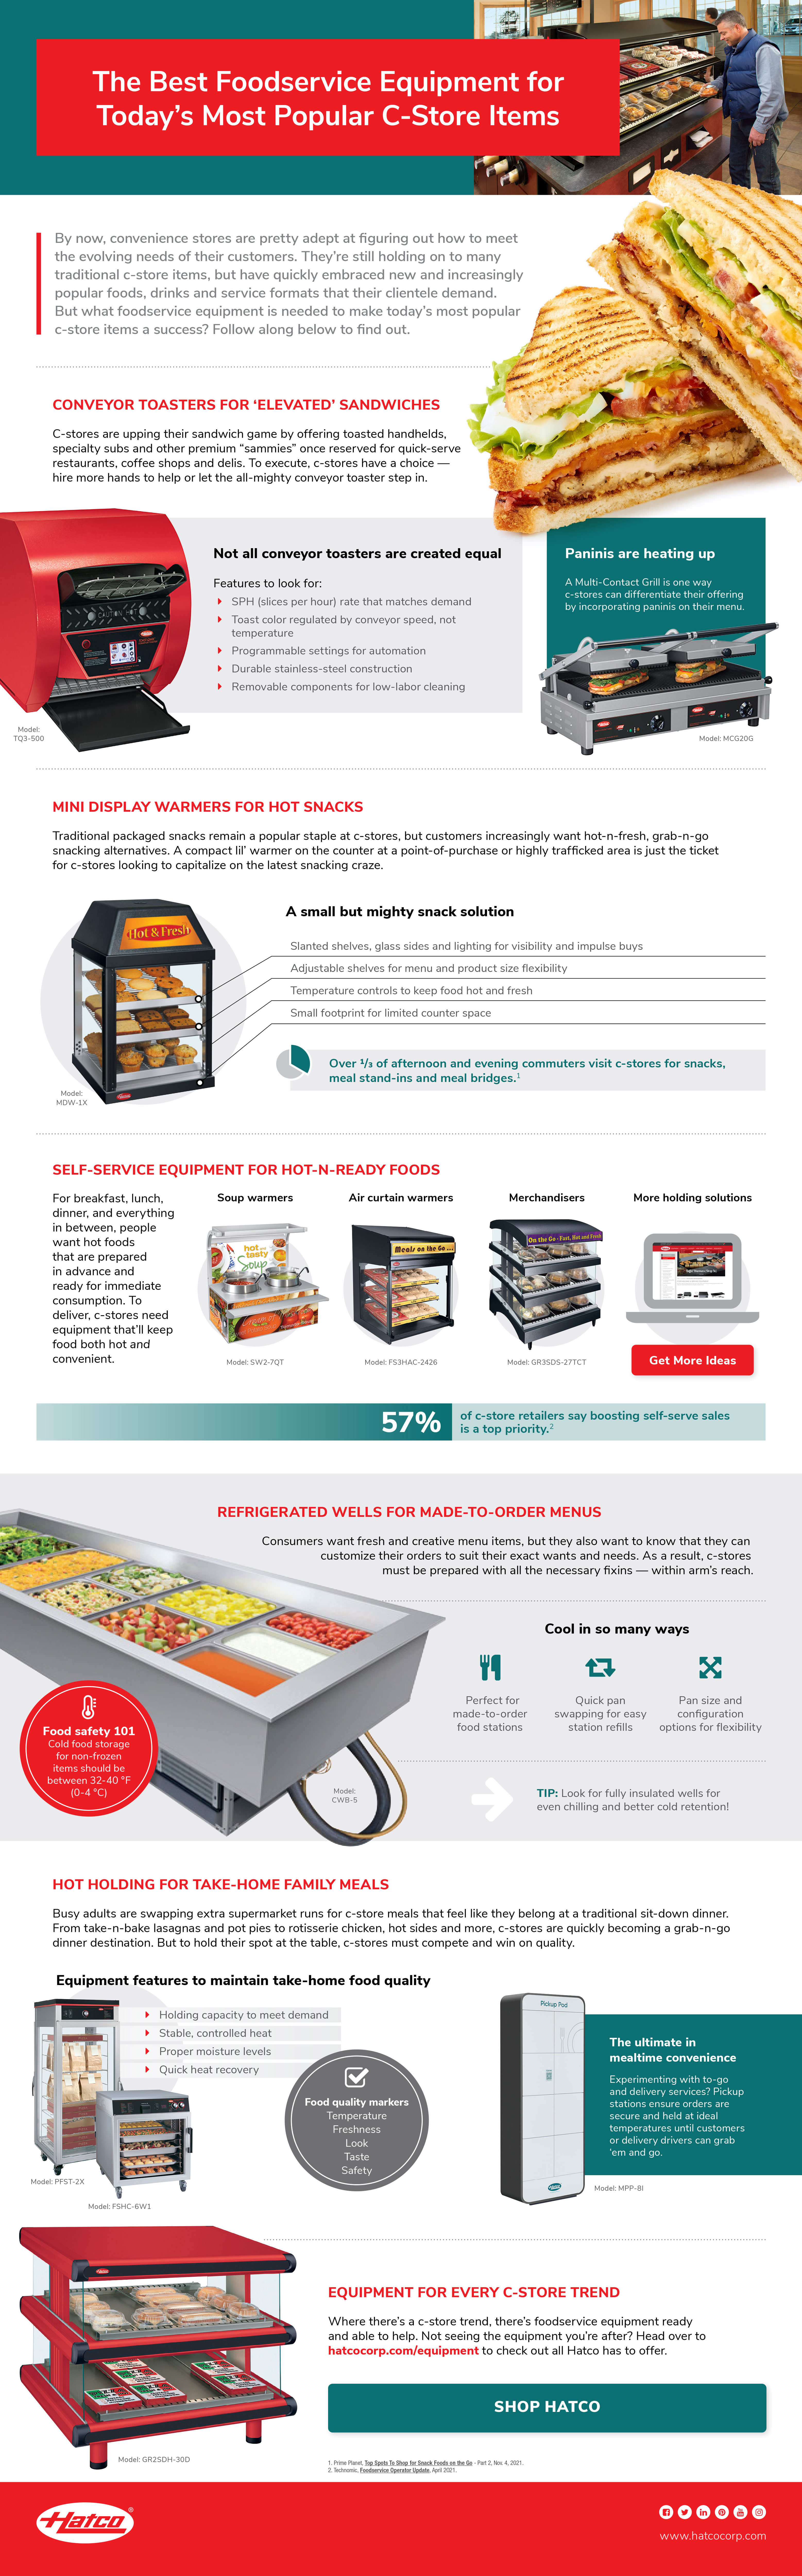 Hatco Best Foodservice Equipment for C-Stores Infographic